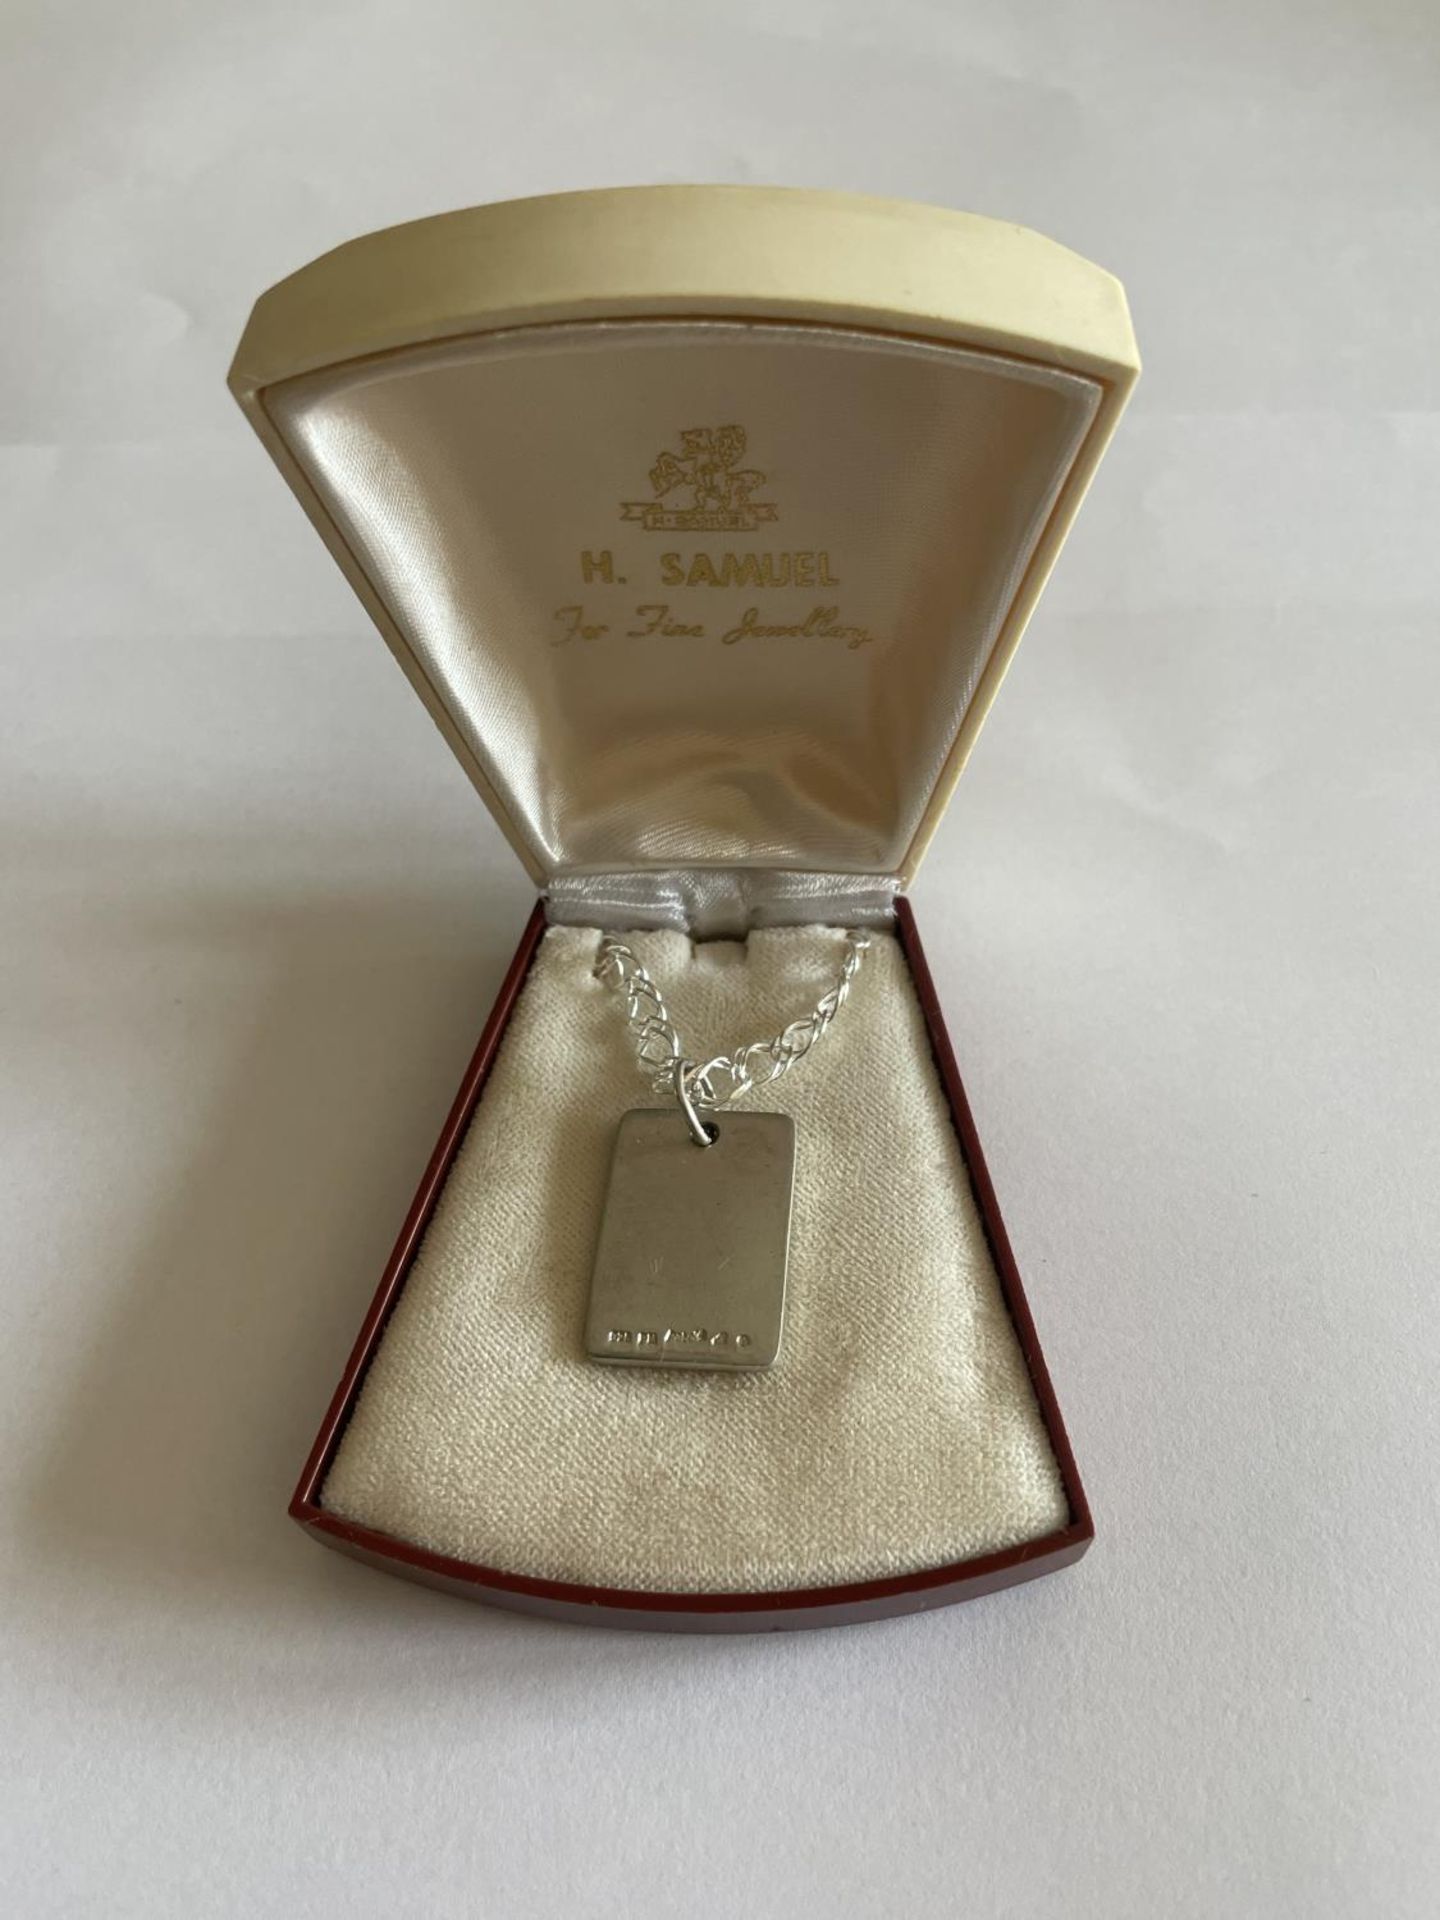 A SILVER NECKLACE WITH INGOT PENDANT IN A PRESENTATION BOX